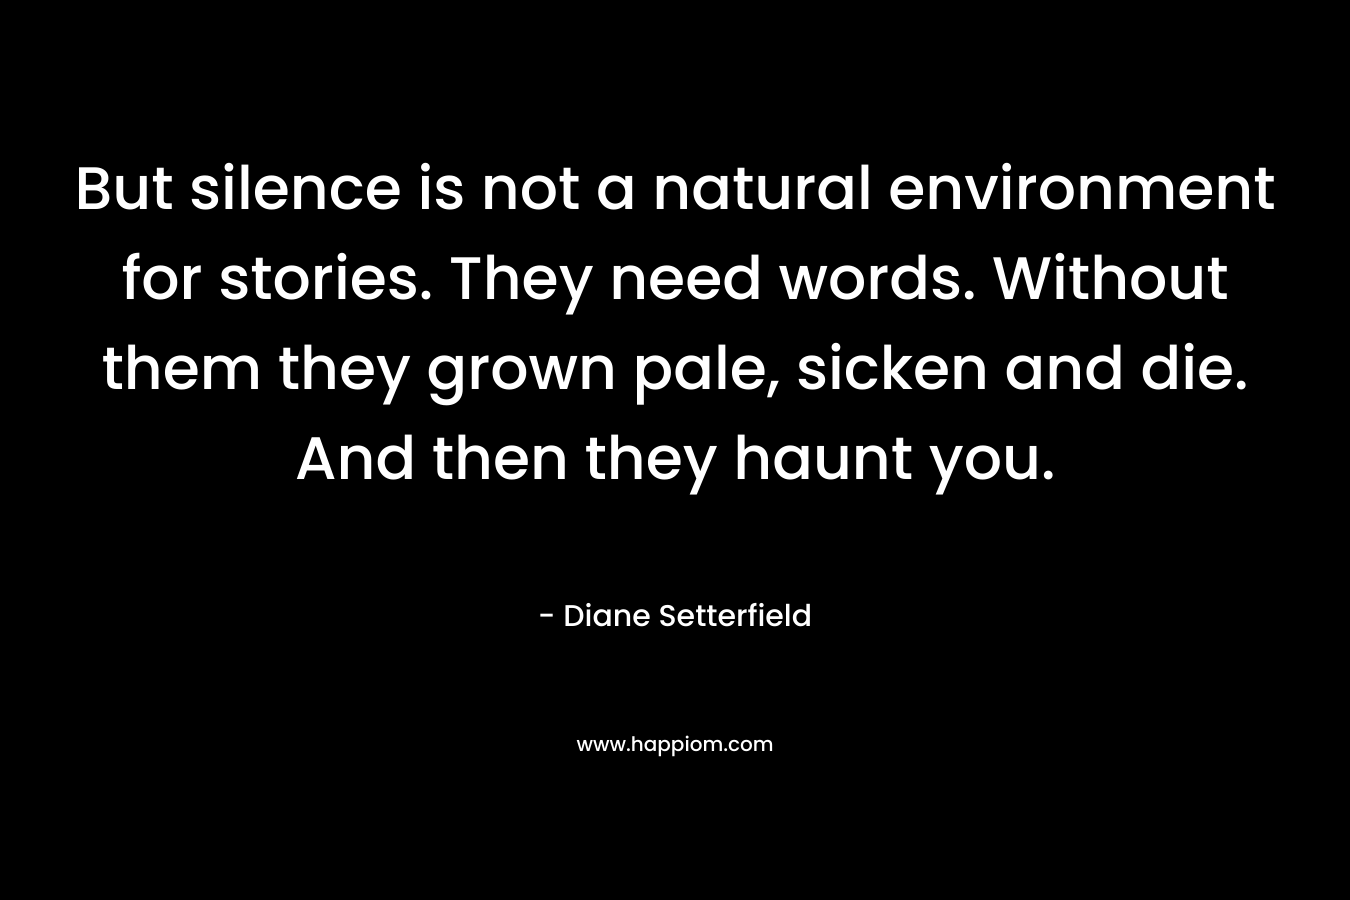 But silence is not a natural environment for stories. They need words. Without them they grown pale, sicken and die. And then they haunt you.